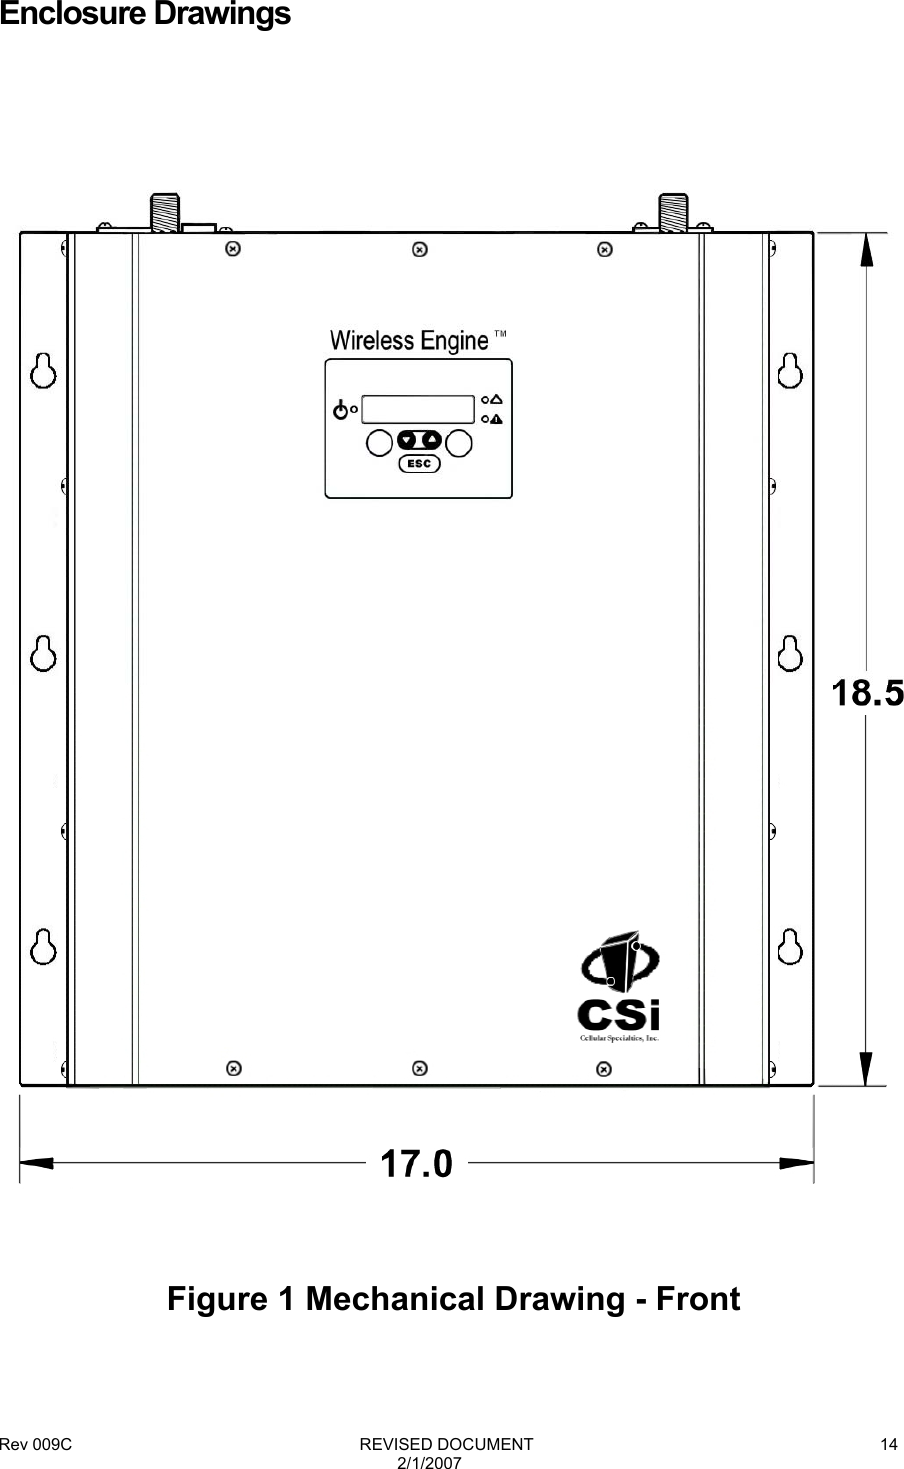 Rev 009C                                                              REVISED DOCUMENT 2/1/2007 14  Enclosure Drawings          Figure 1 Mechanical Drawing - Front 